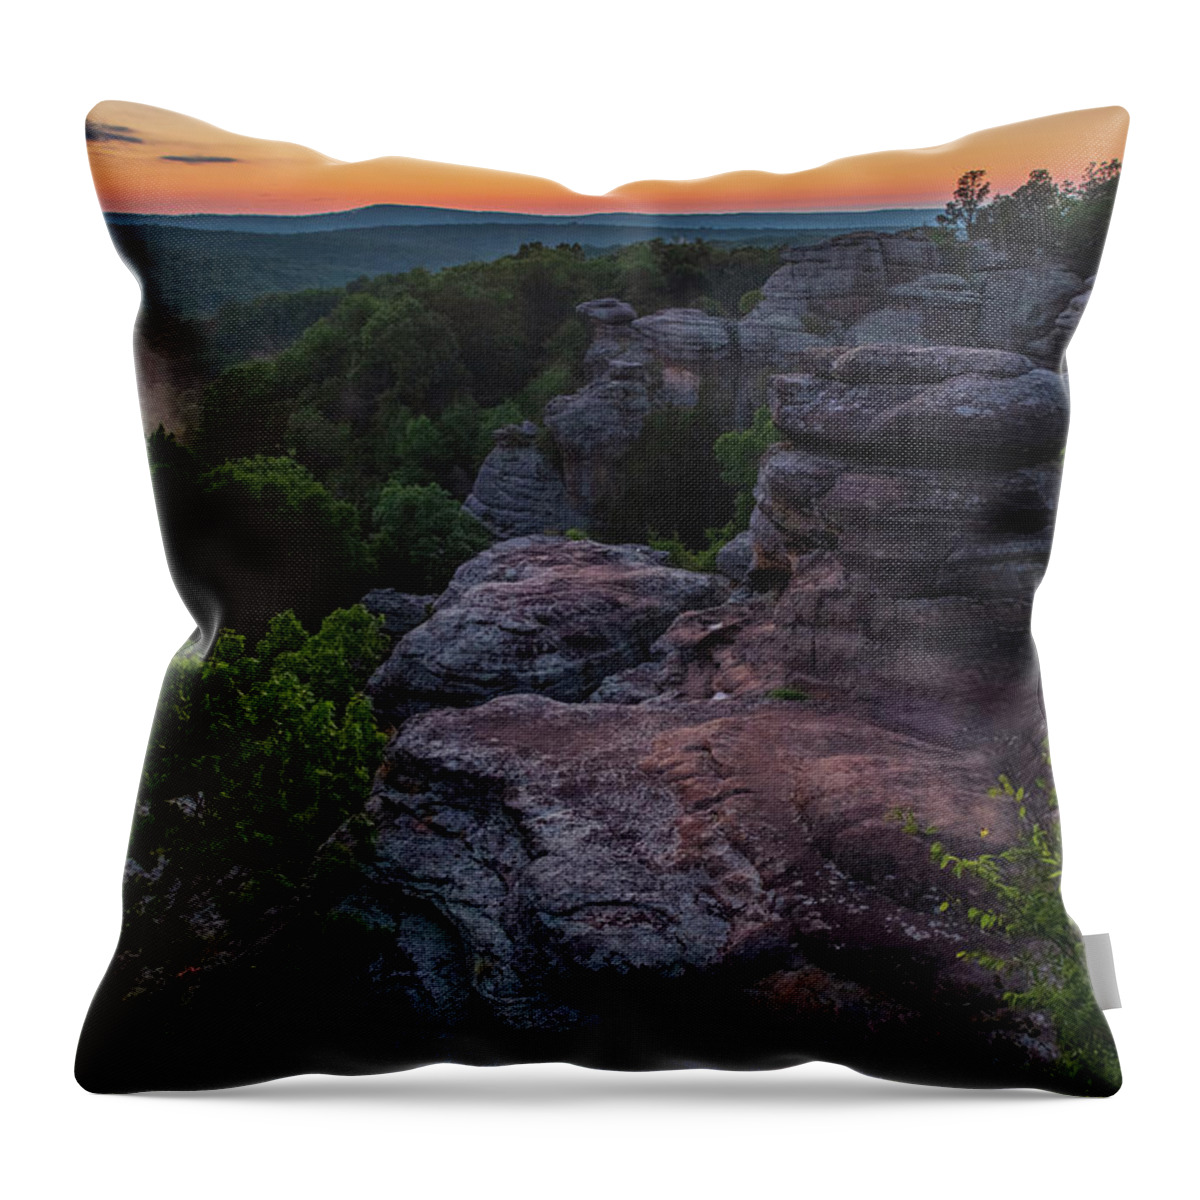 Landscape Throw Pillow featuring the photograph Mists in the Garden by Grant Twiss